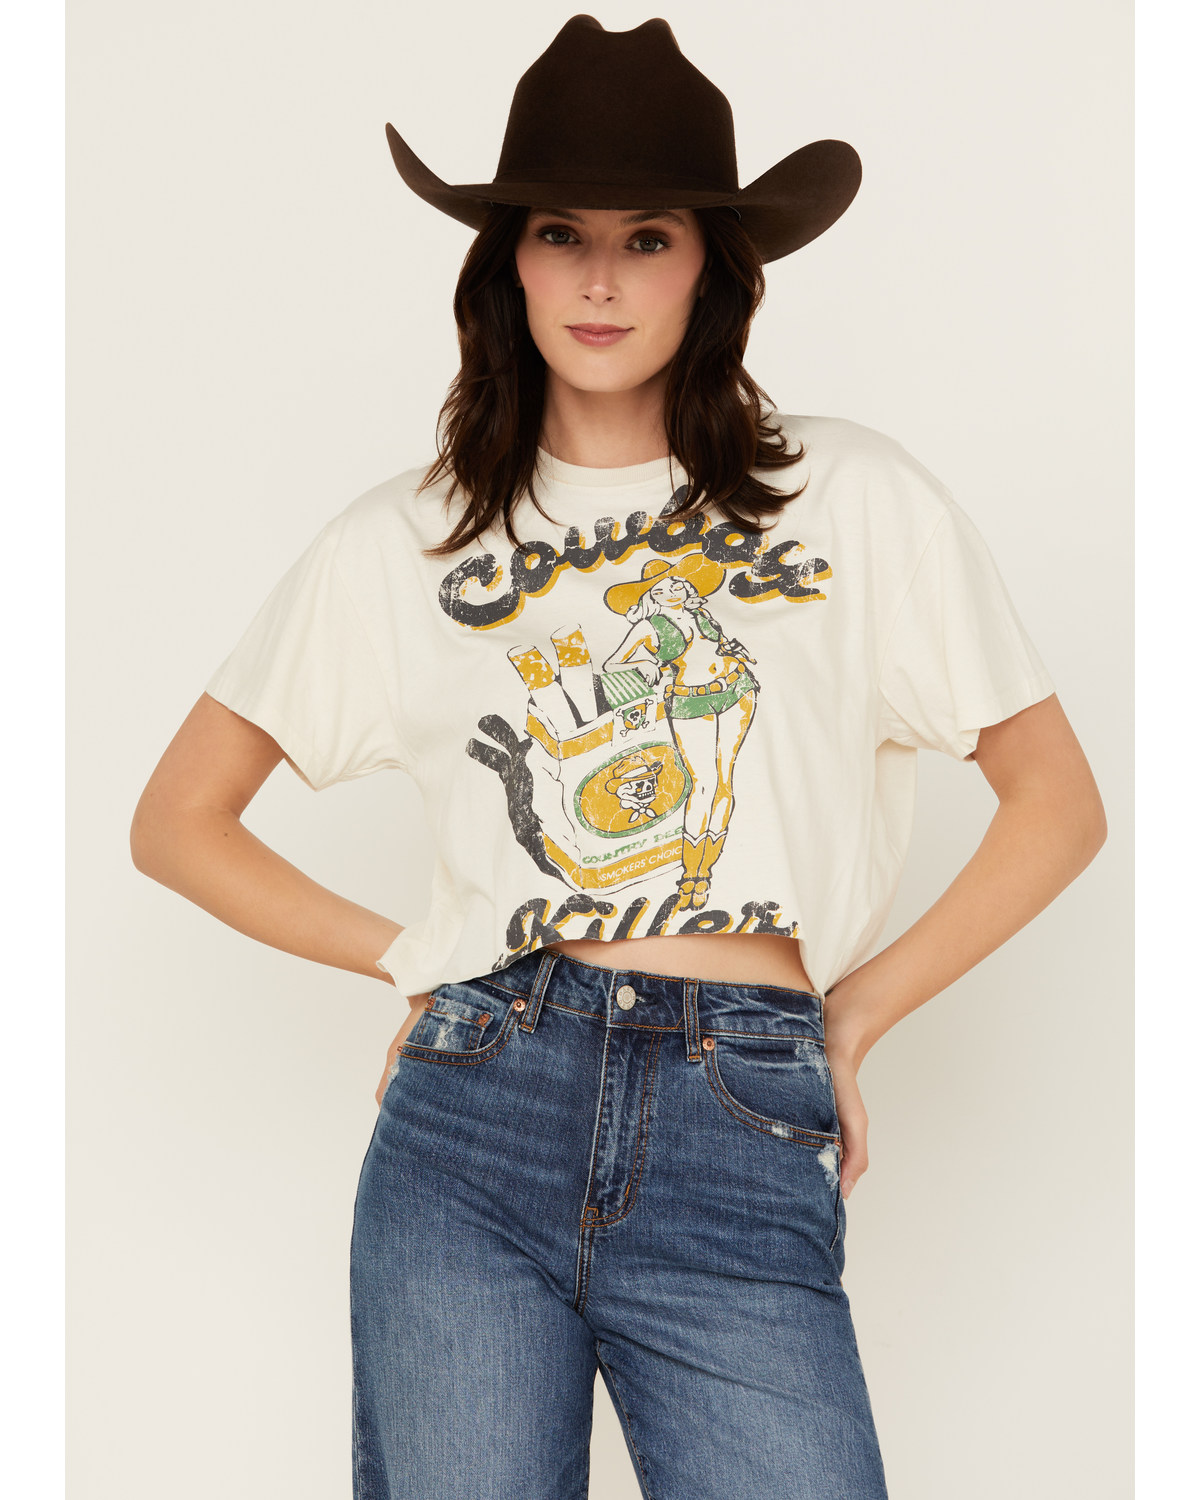 Country Deep Women's Cowboy Killer Short Sleeve Cropped Graphic Tee